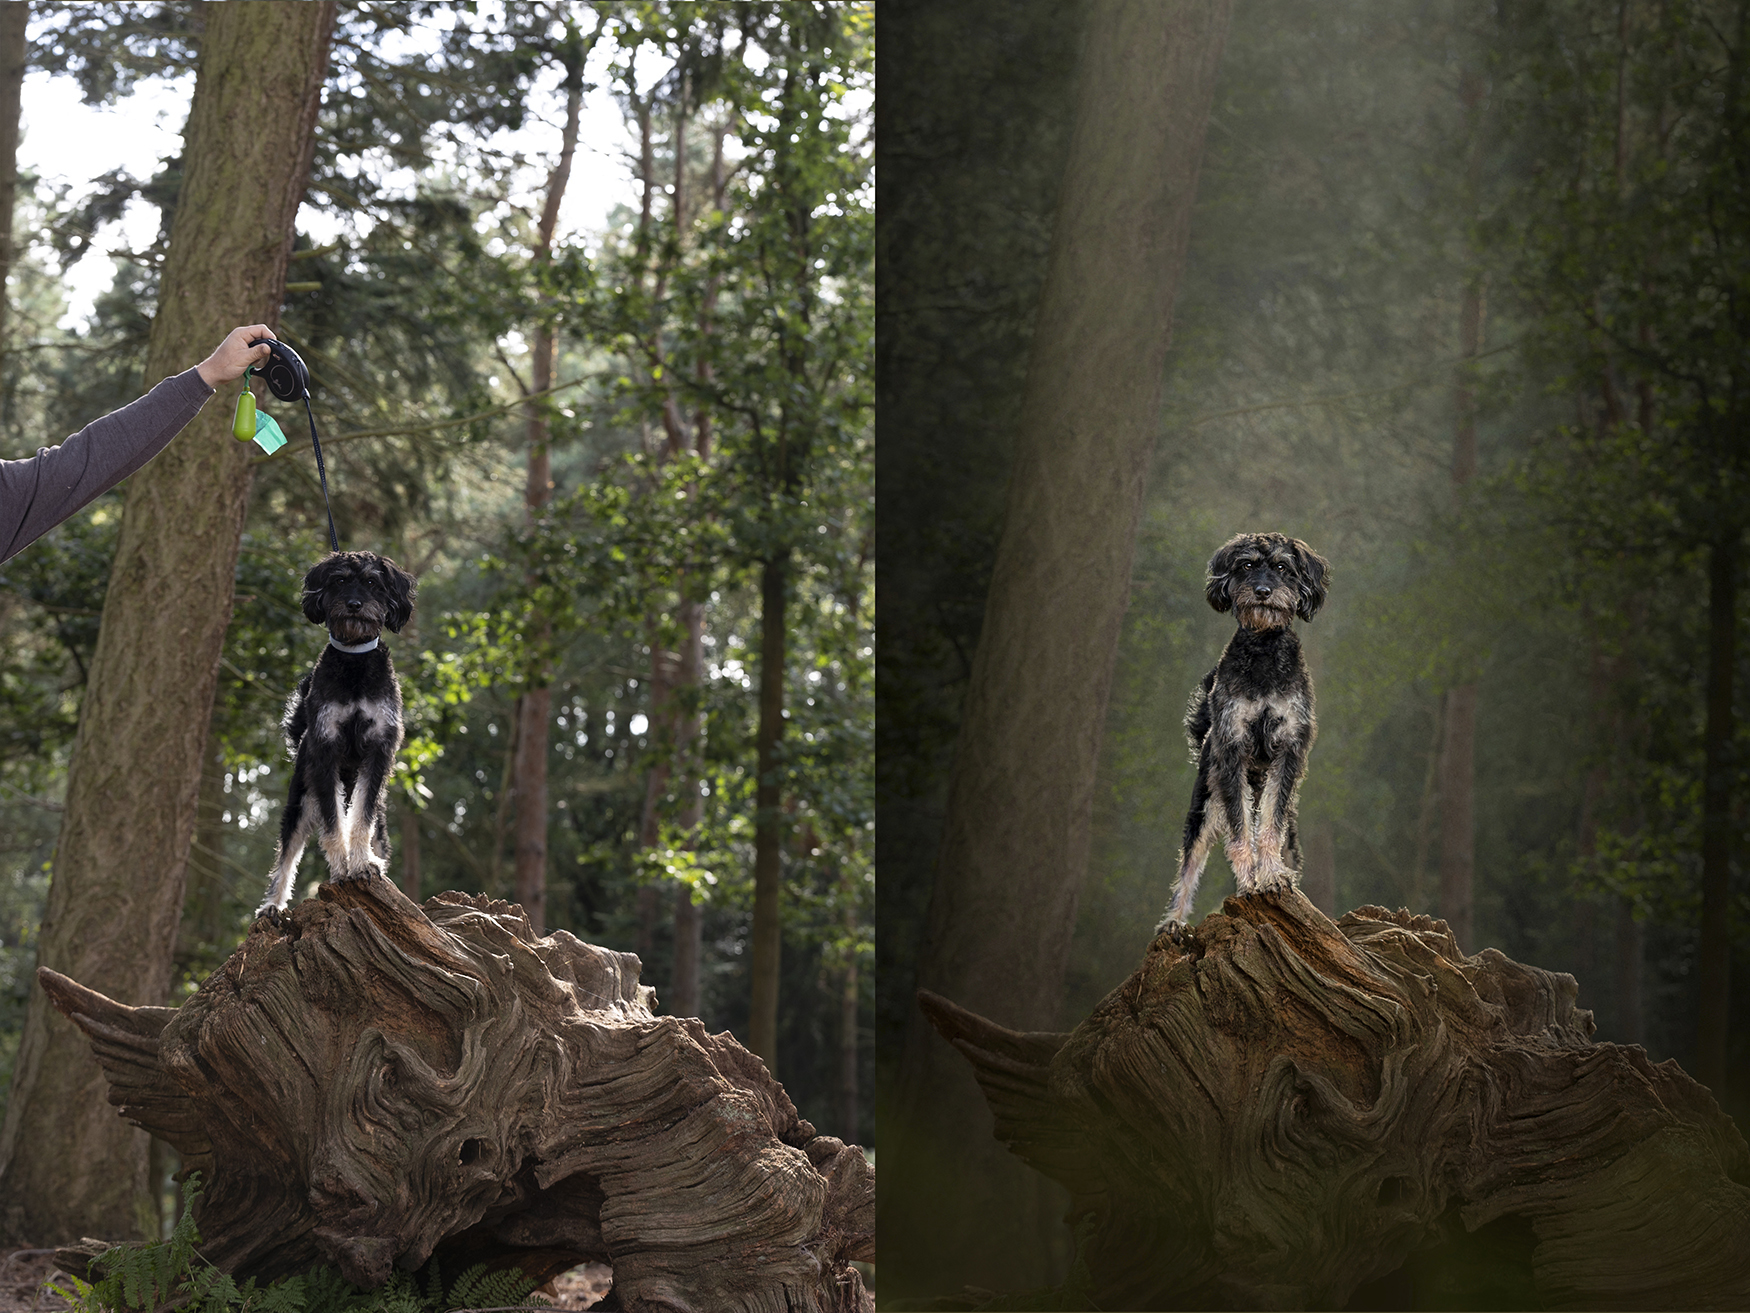 an example of dog photography before and after, with and without a lead